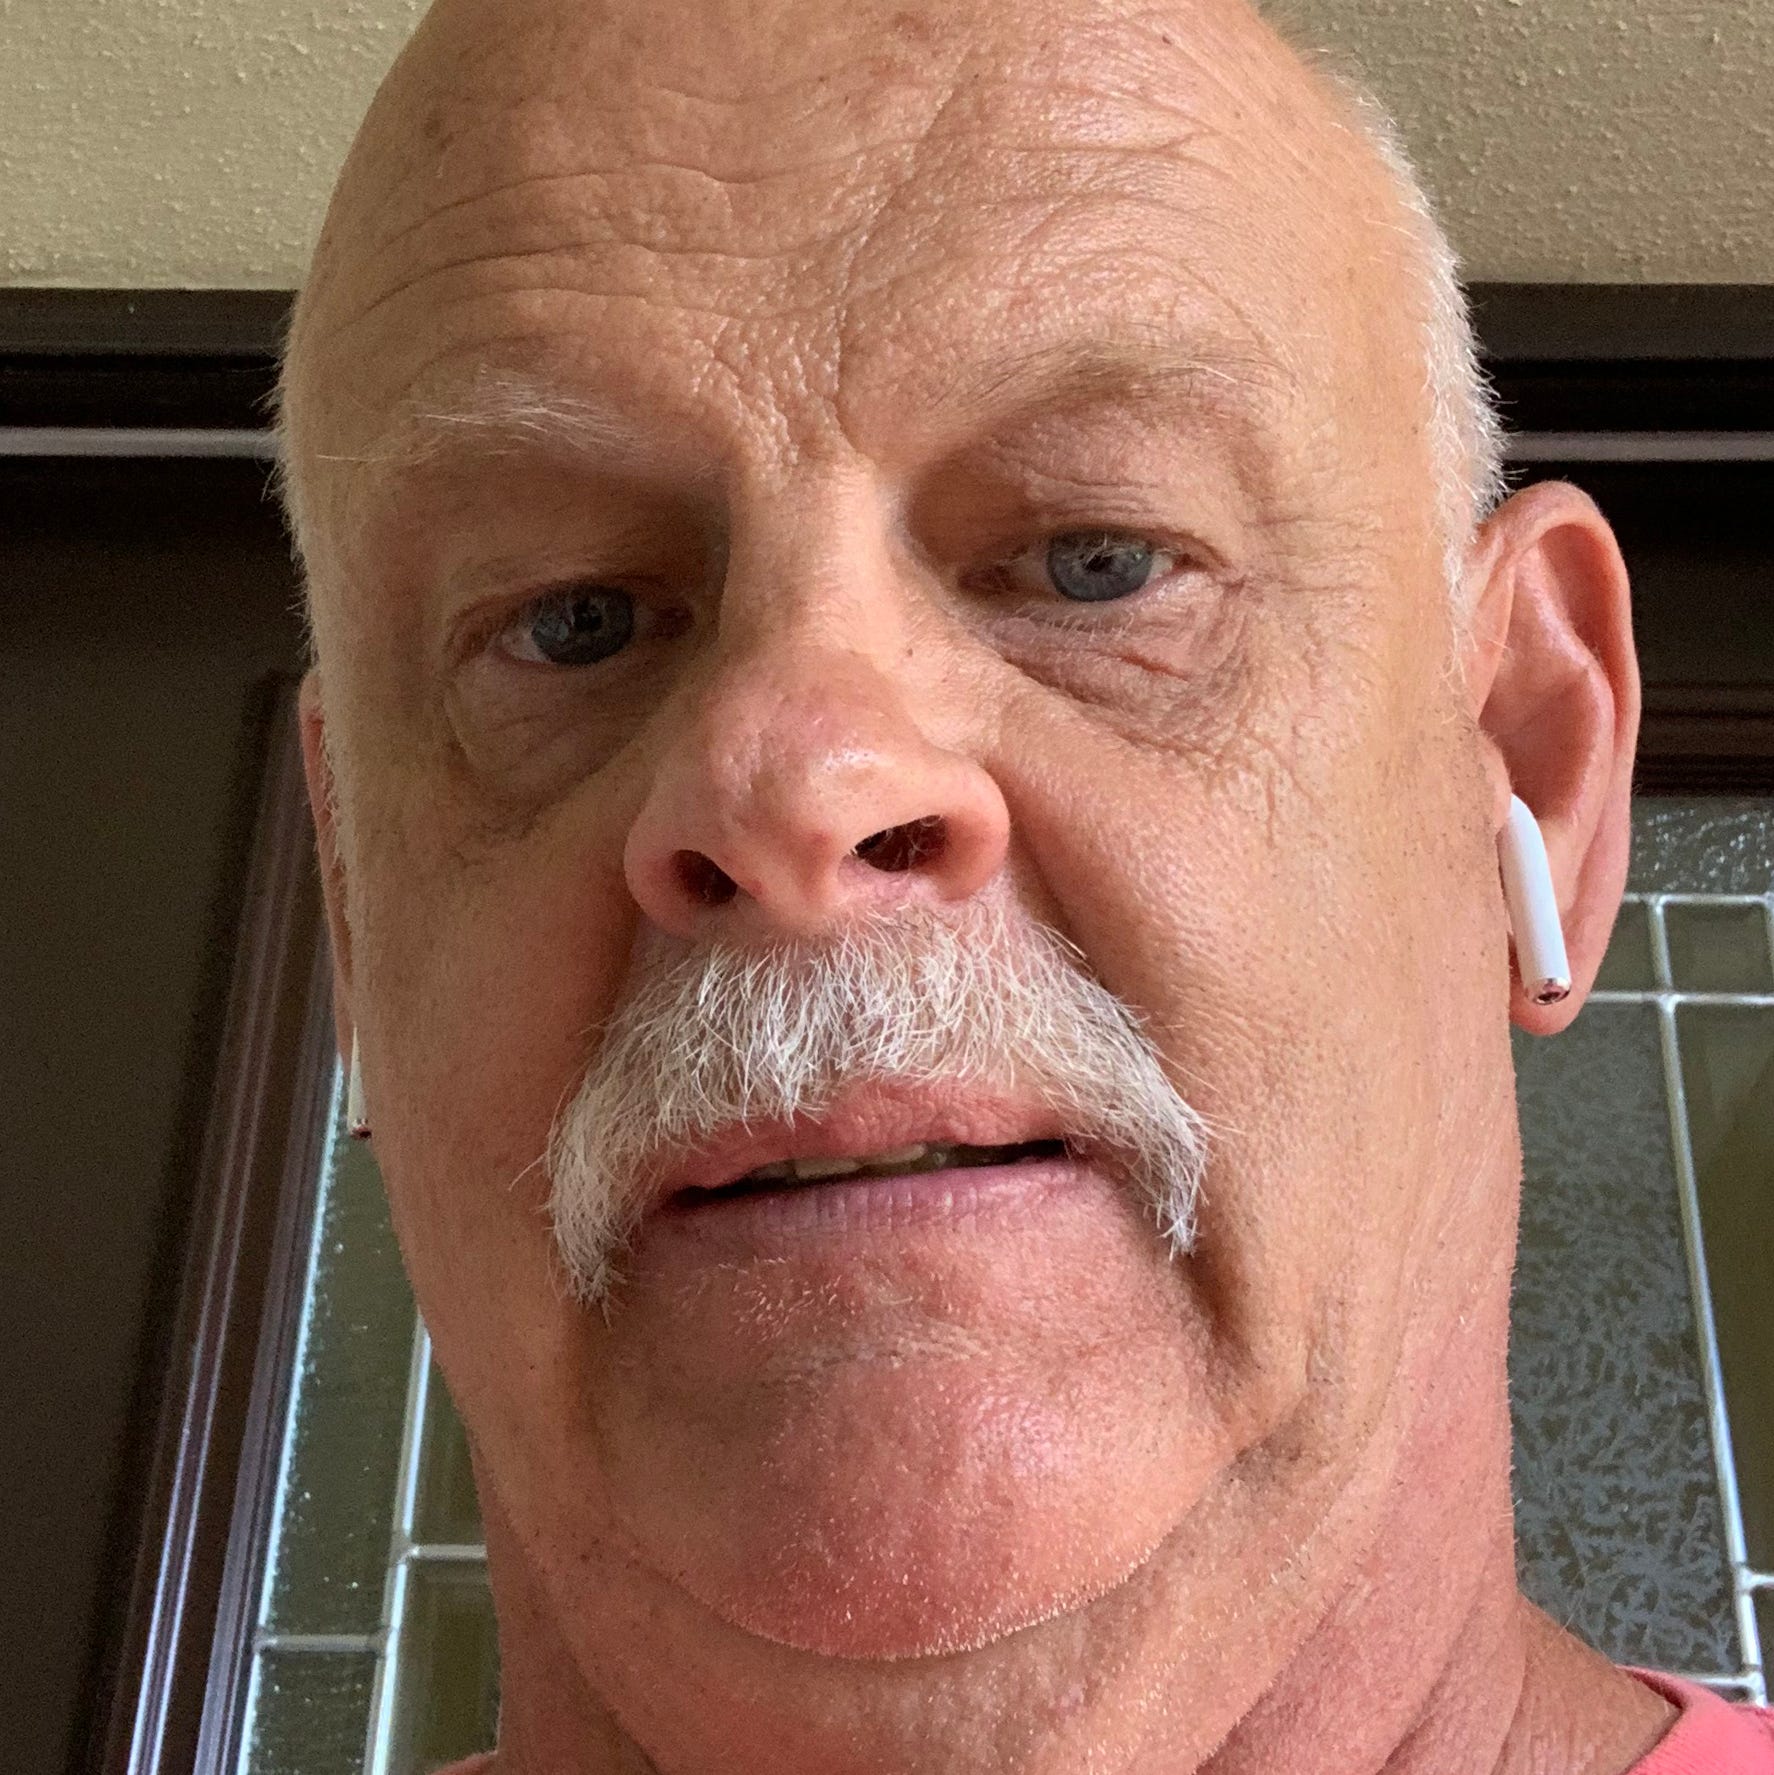 Philip Frincke of Venice, Florida is the owner of a 2014 Ford Focus. He took this photo on July 8 at home. He said, "I had more hair before this whole deal started back in 2014."